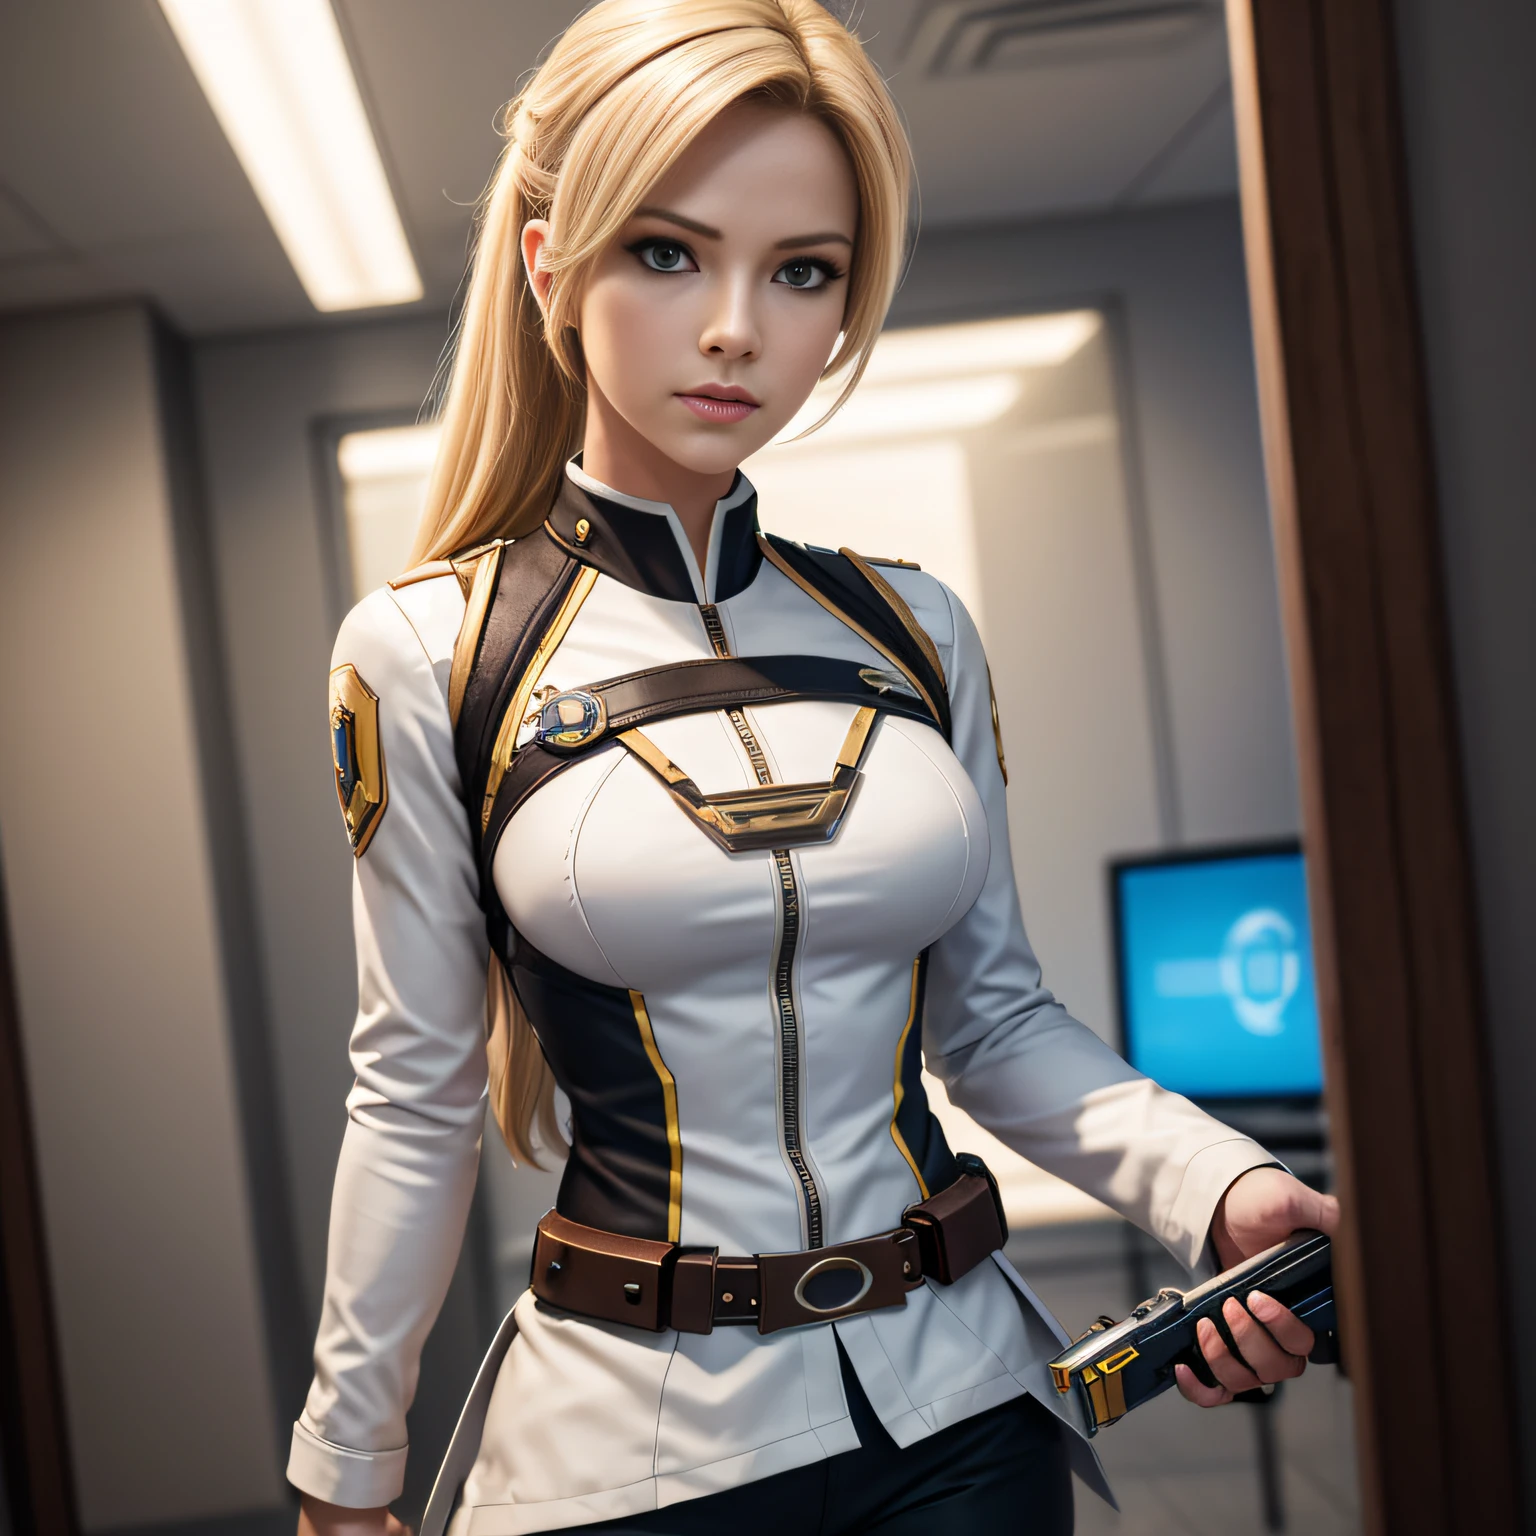 Best quality, Masterpiece, eyes reflection, Best quality, Masterpiece, The Eye of Mercy Reflex, Alone, In Starkta, Perfect body, Blonde, Overwatch mercy style hairstyle, OW uniform, Green eyes, Two arms, Hold your signature weapon, Low-cut uniform, utility belt, Alone, Command Room, 8K, Masterpiece, A high resolution, absurderes, natural volumetric lighting and best shadows, Deep depth of field,  Sharp focus, Naughty face, Super delicious, Medium breasts